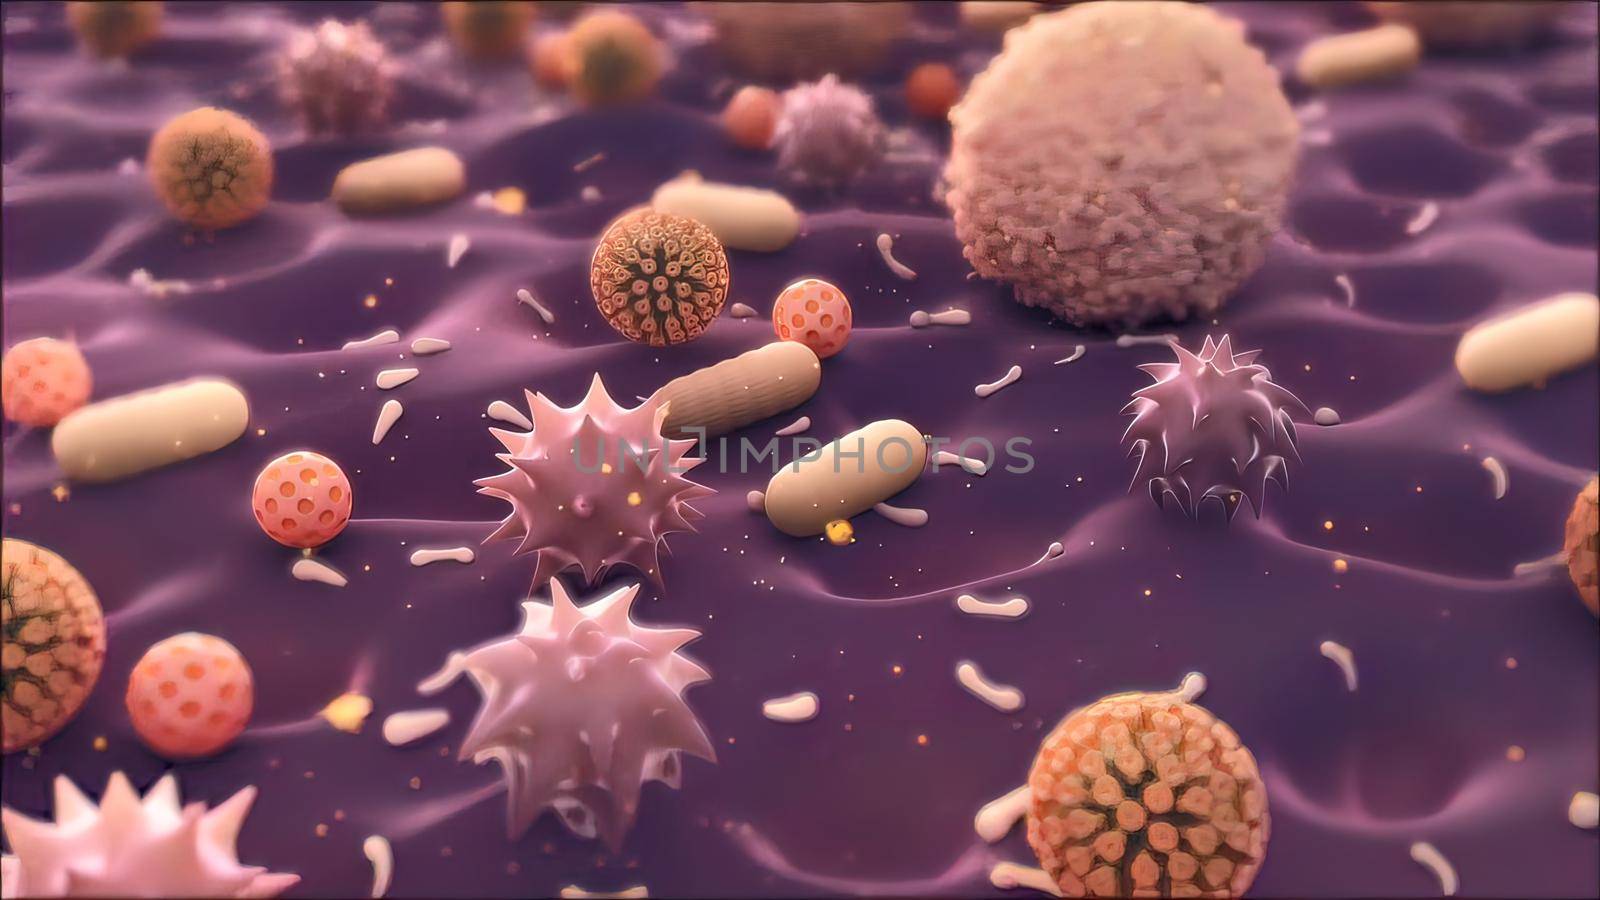 Bacteria and virus in the immune system by creativepic